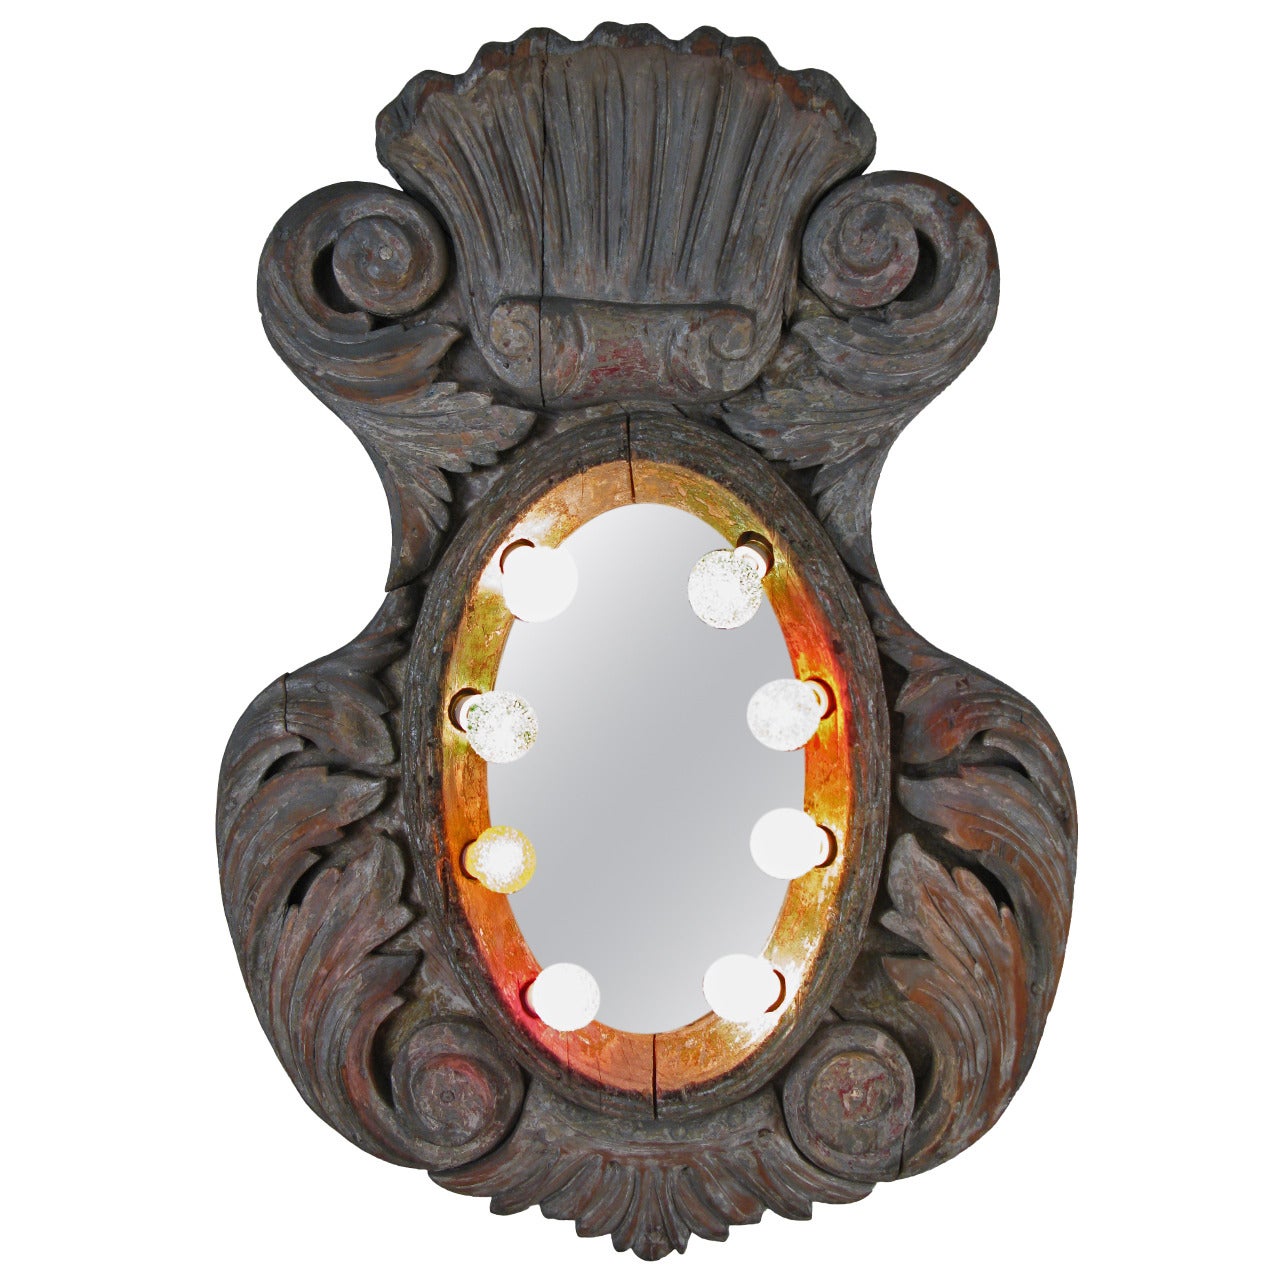 19th Century Carved and Lighted Carousel Mirror